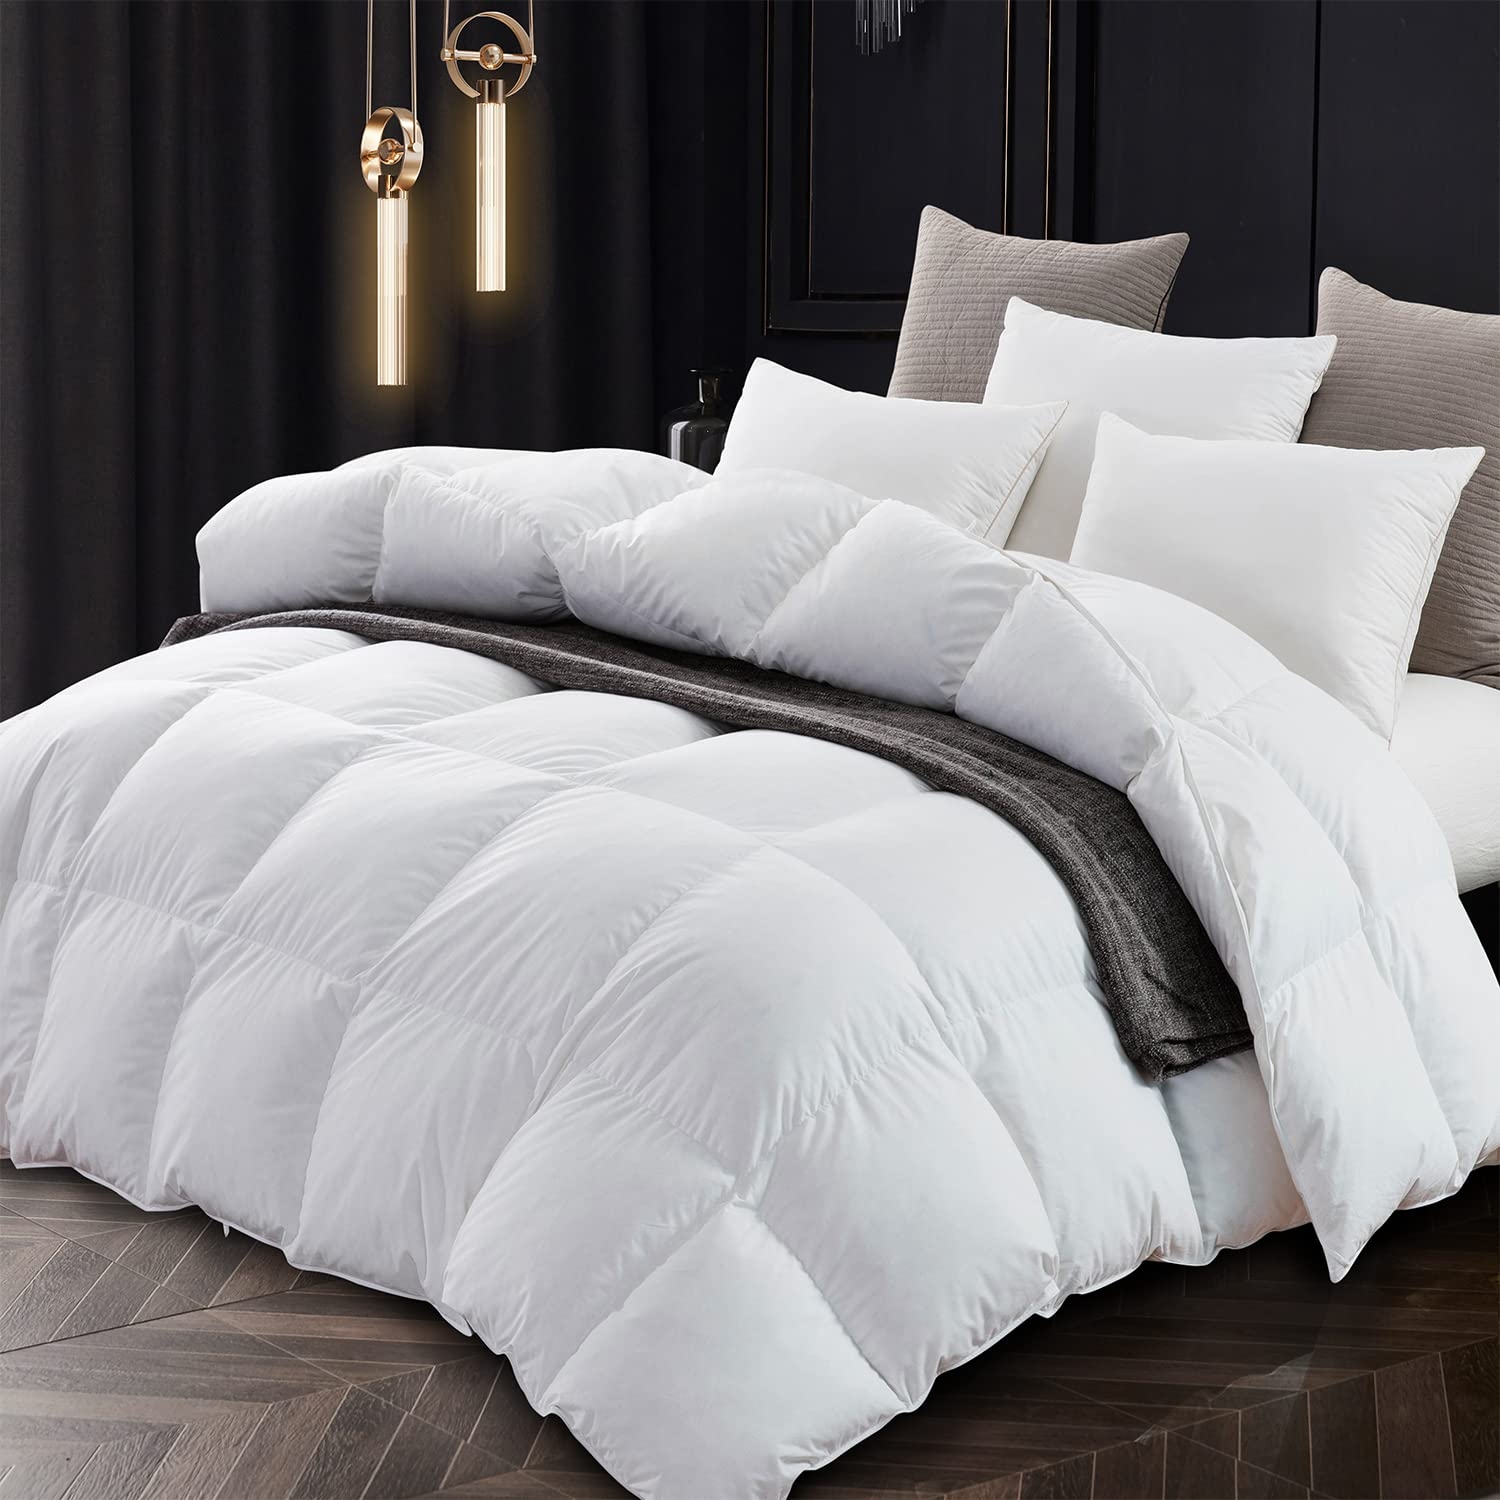 early bird special 15%OFF Affordable Luxury Real down Comforters